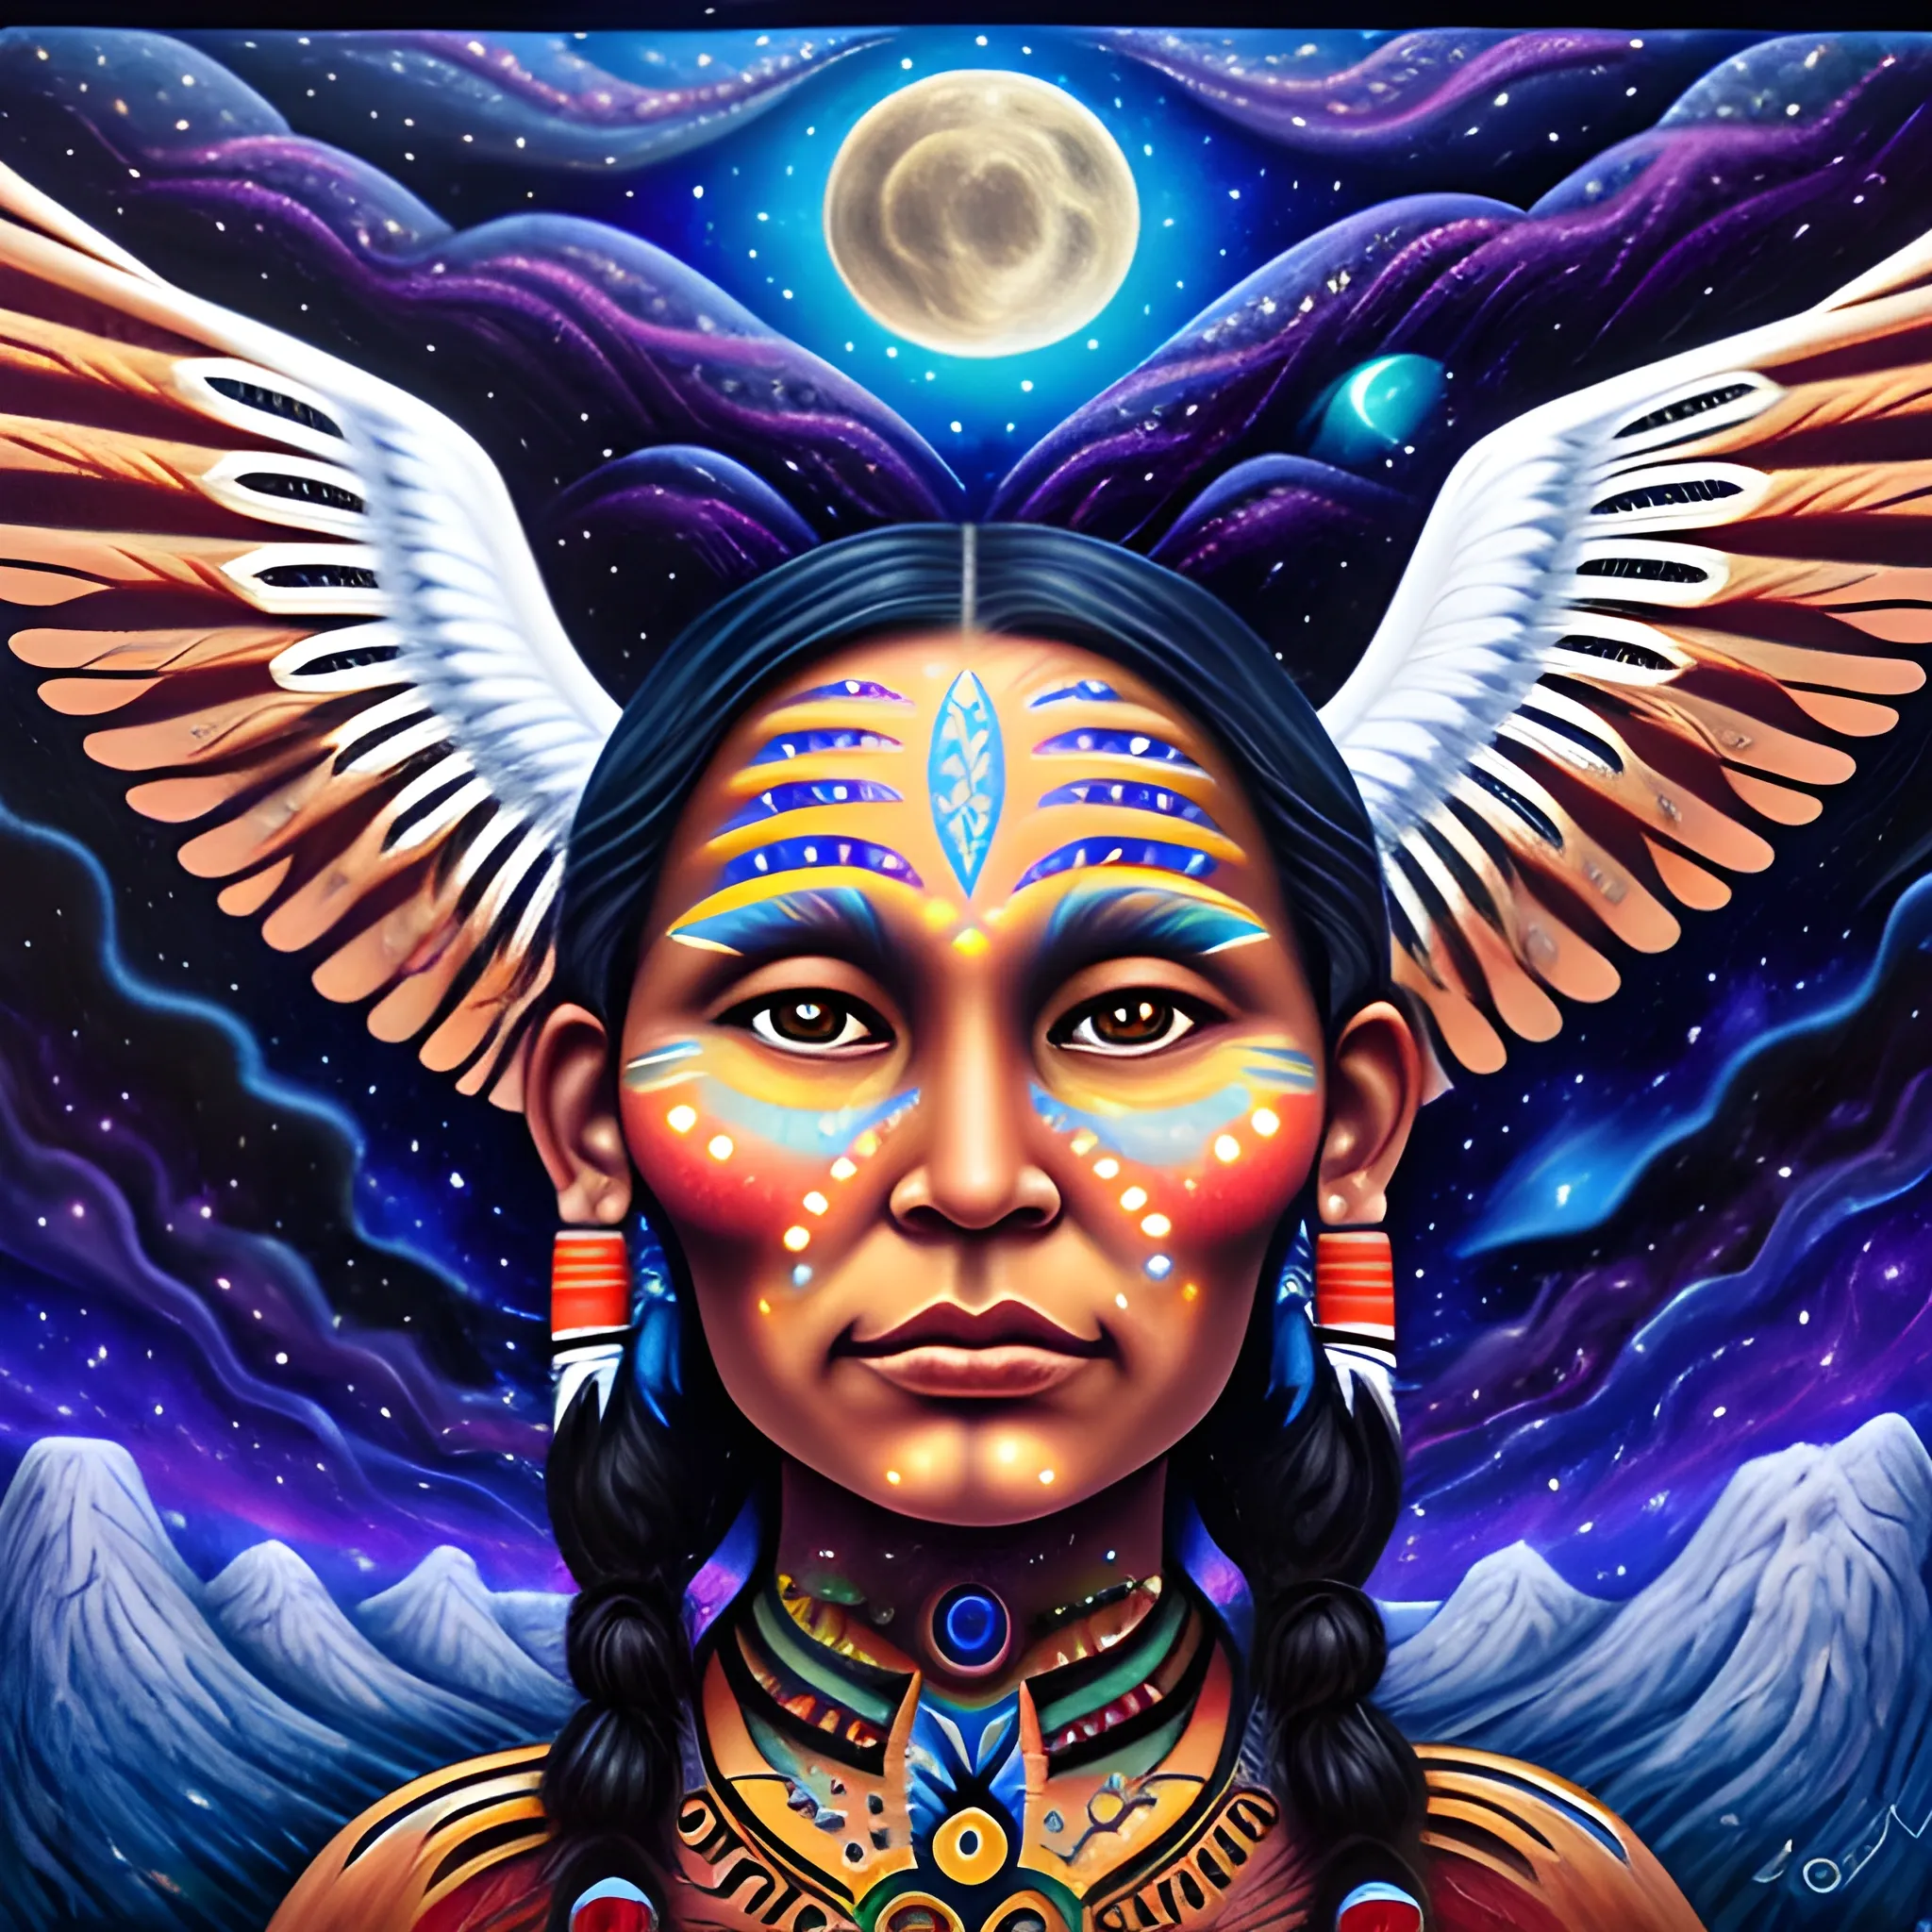 AN INDIGENOUS WOMAN WITH A BEAUTIFUL FACE, WITH WINGS CLIMBING THE FORESTED MOUNTAINS IN A STARRY NIGHT, A HUGE MOON, GALAXIES , Trippy, 3D, Oil Painting, Cartoon